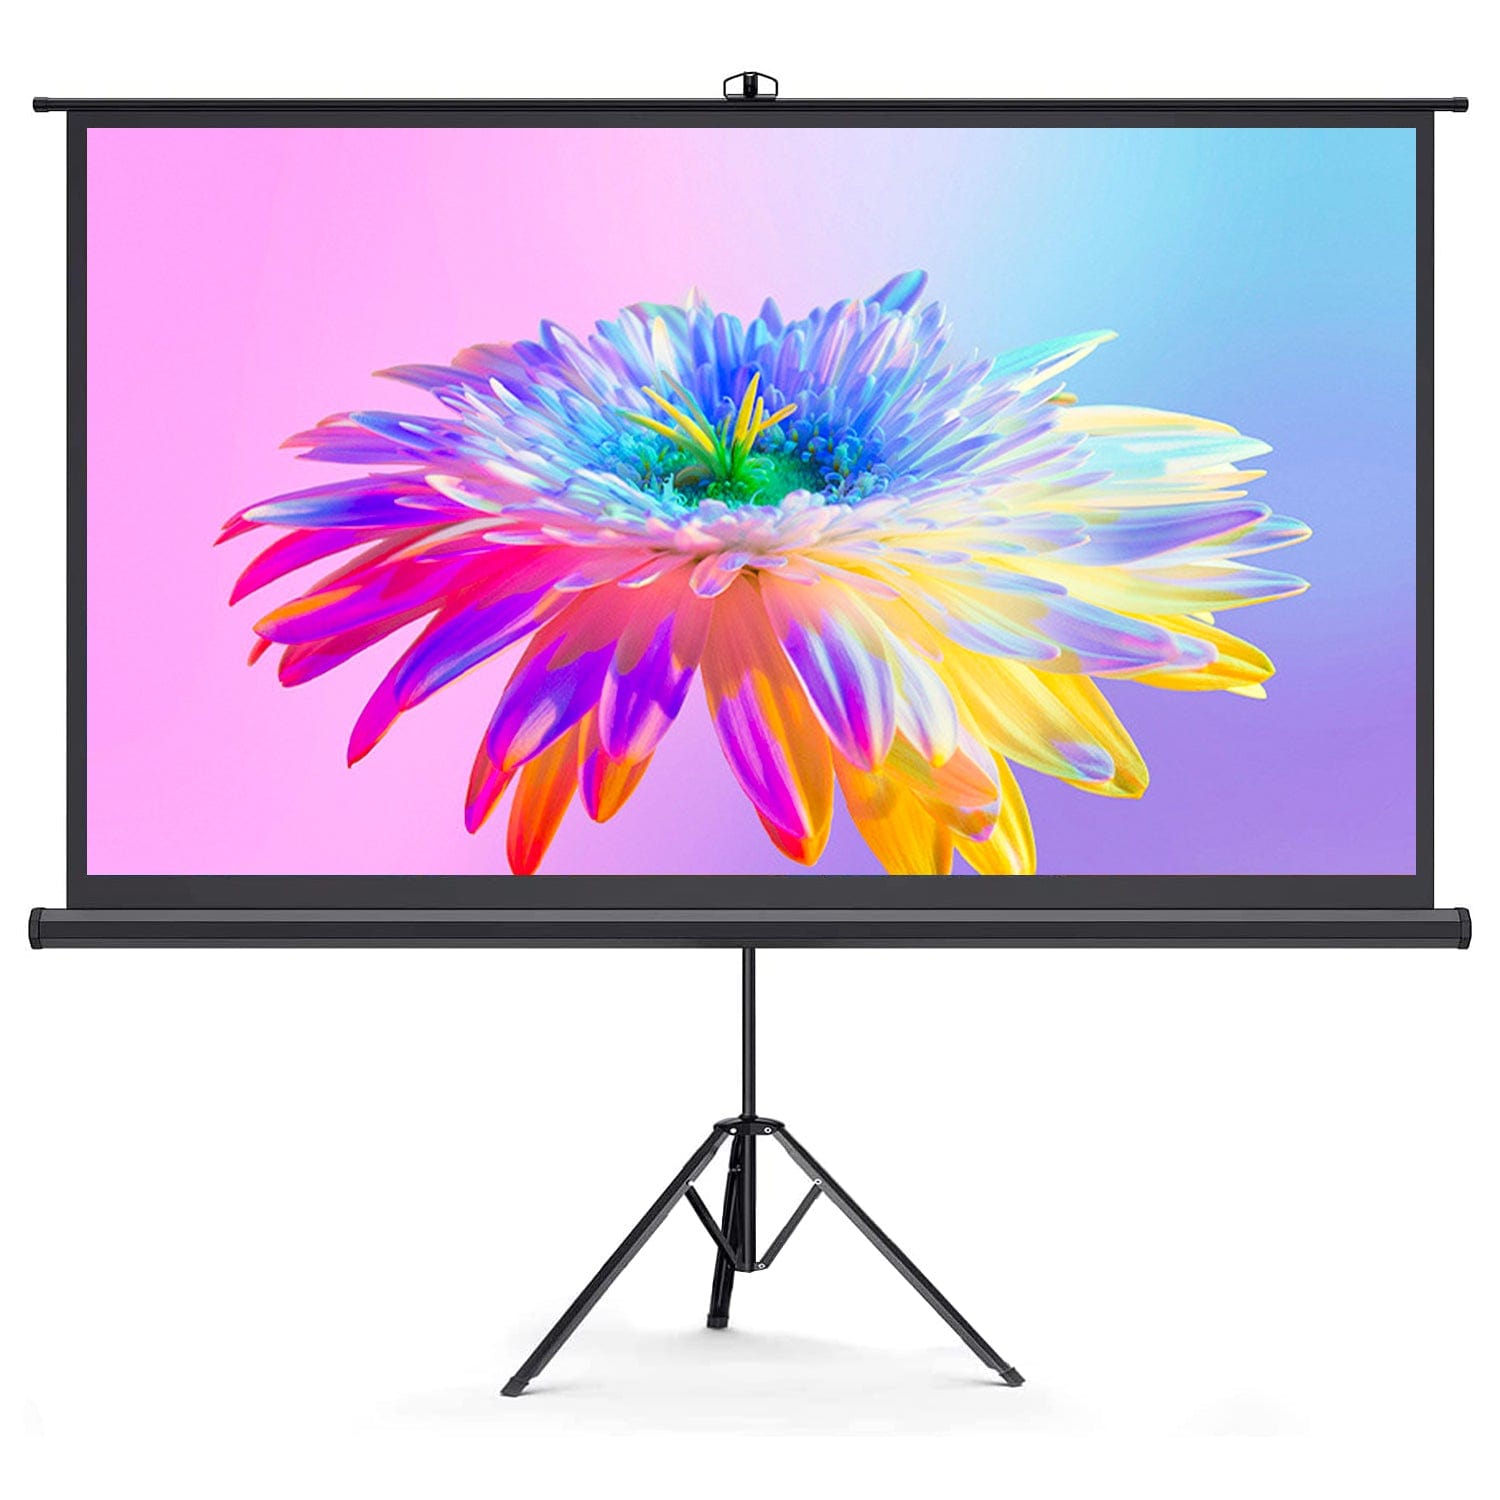 Bomaker 100-Inch Projector Screen with Stand [Available in USA Only]